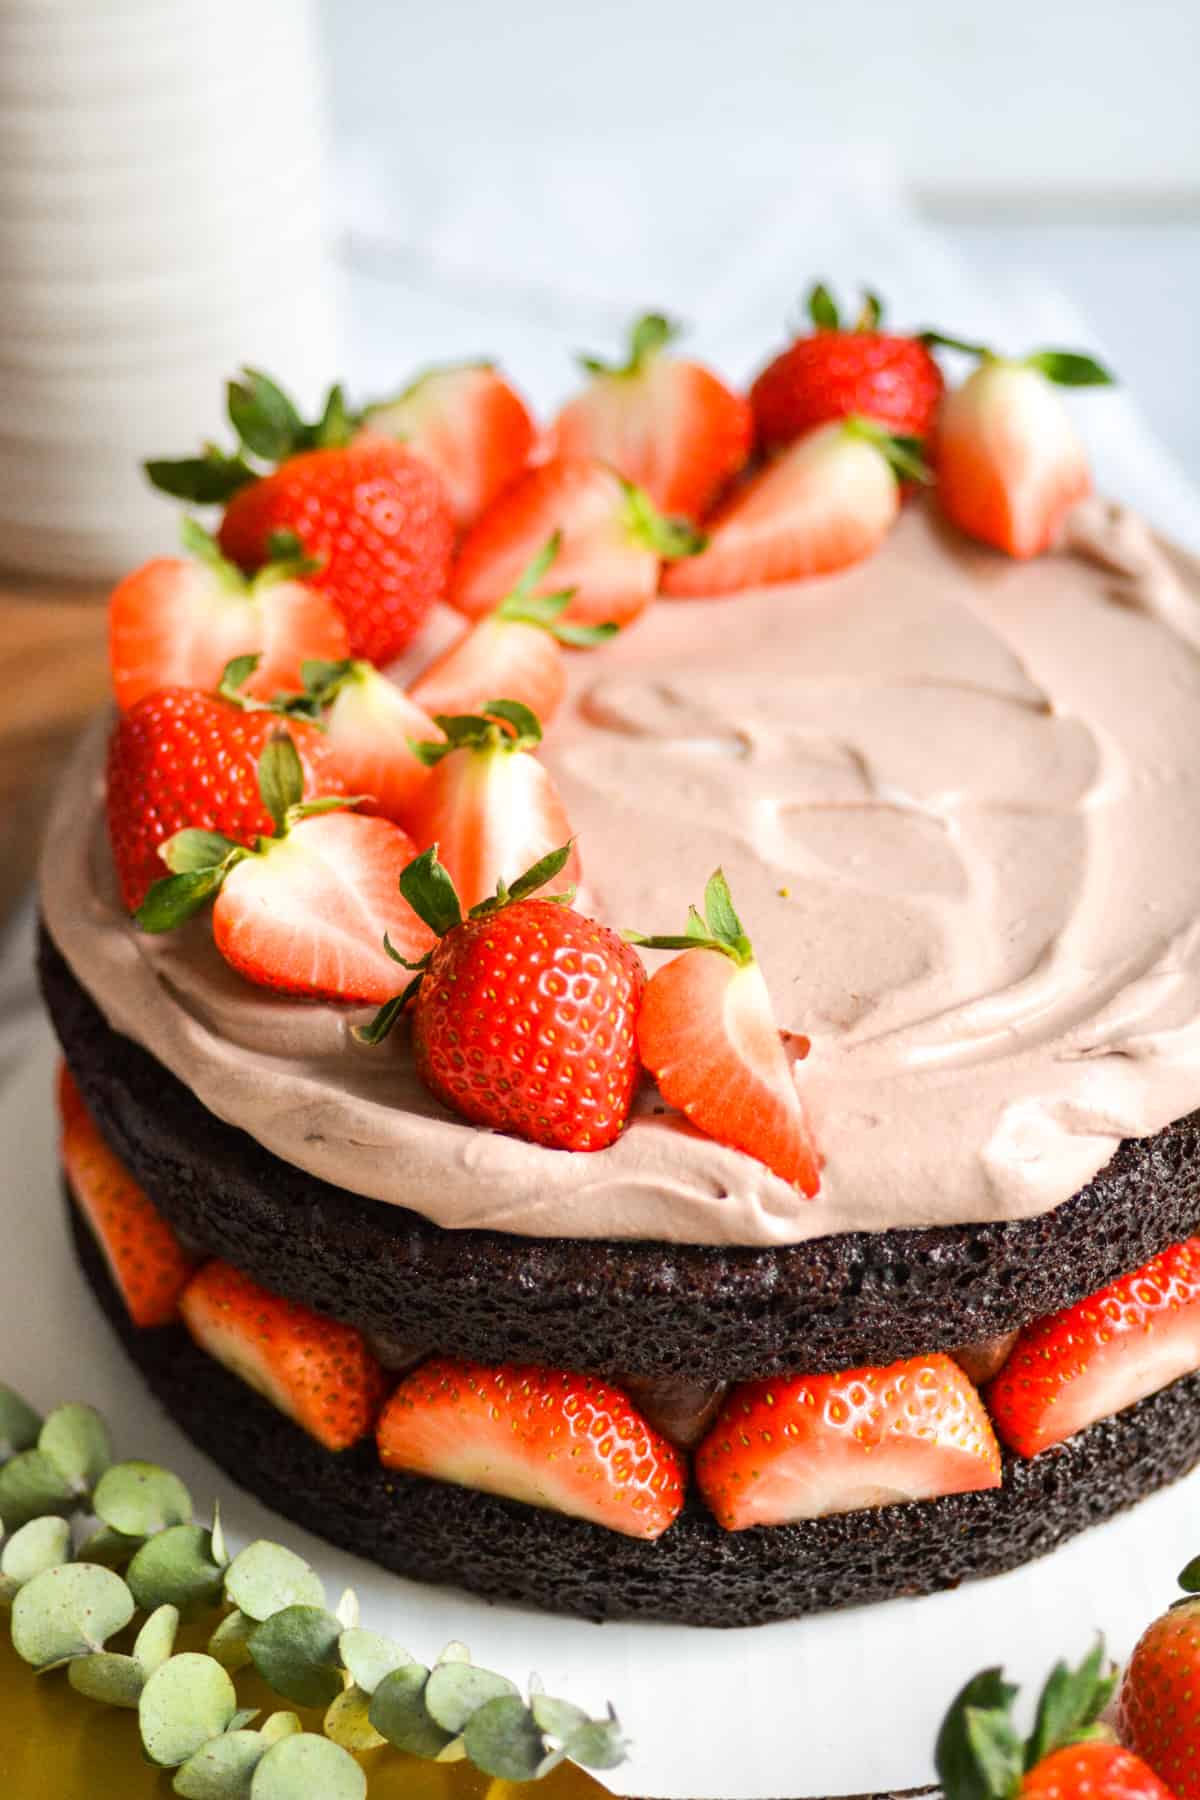 Vegan Chocolate Strawberry Fudge Cake topped with strawberries on a white cloth.